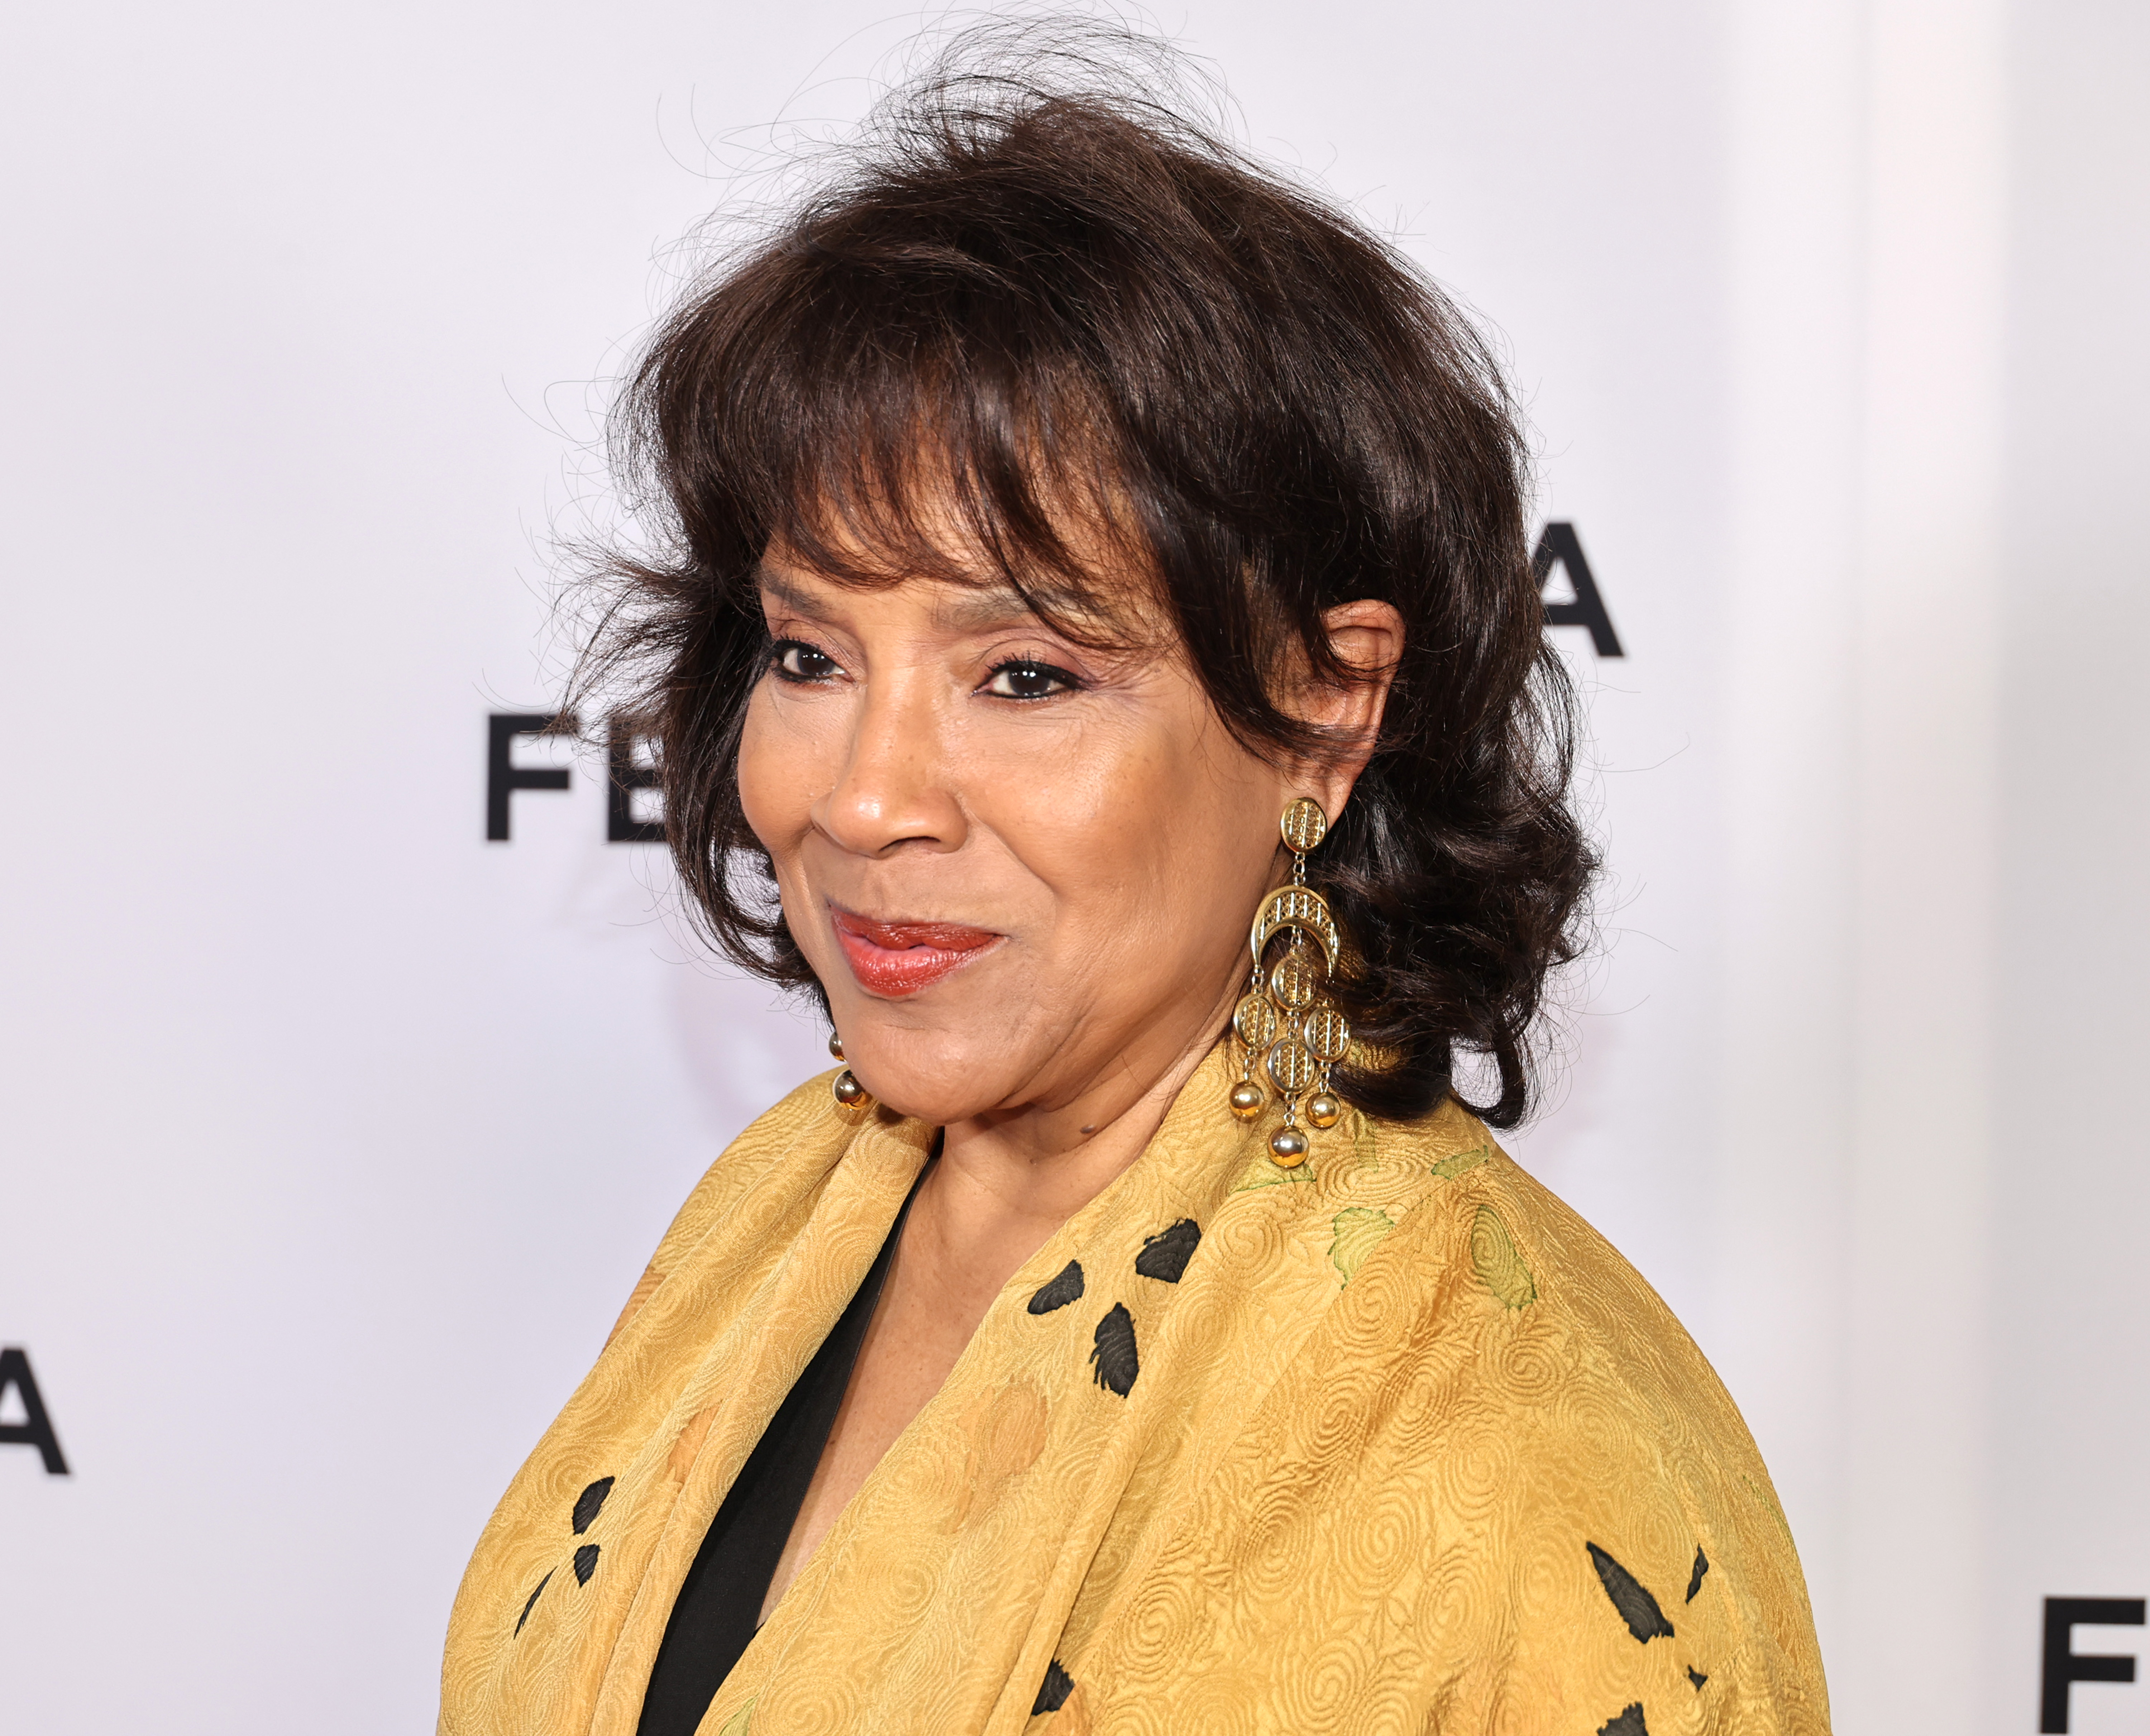 Phylicia Rashad attends the "Diarra From Detriot" premiere during the 2023 Tribeca Festival at SVA Theatre on June 14, 2023, in New York City. | Source: Getty Images